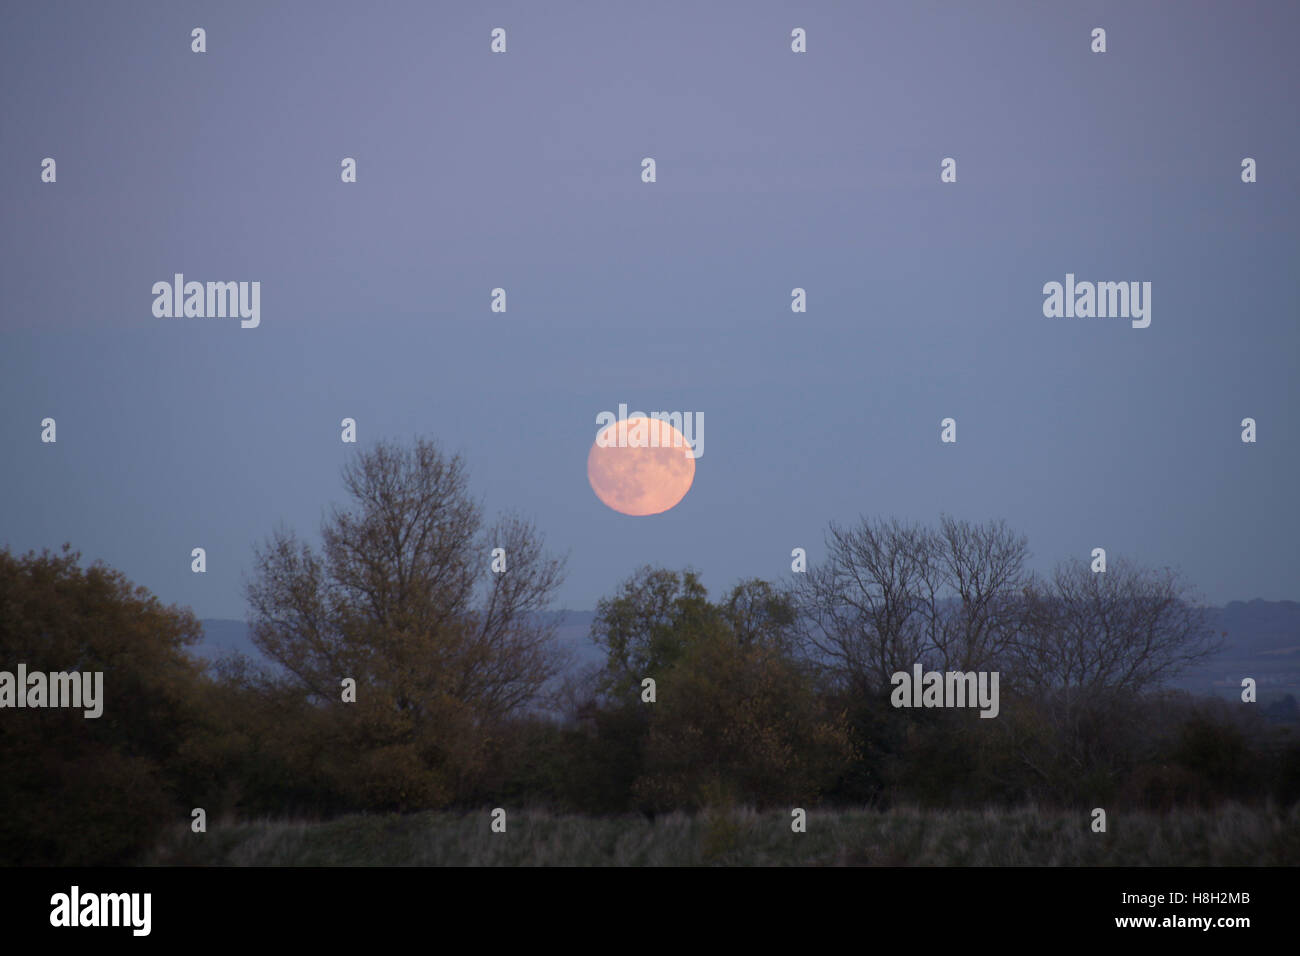 Nearly full Moon rising over distant hills, Oxfordshire, UK, 13 November 2016. On this occasion the Moon was close to perigee and was larger than average. The record 'supermoon' was due the next day. Rippling in the edge of the Moon is caused by layers in Earth's atmosphere. Credit Robin Scagell/Galaxy/Alamy Live News Stock Photo